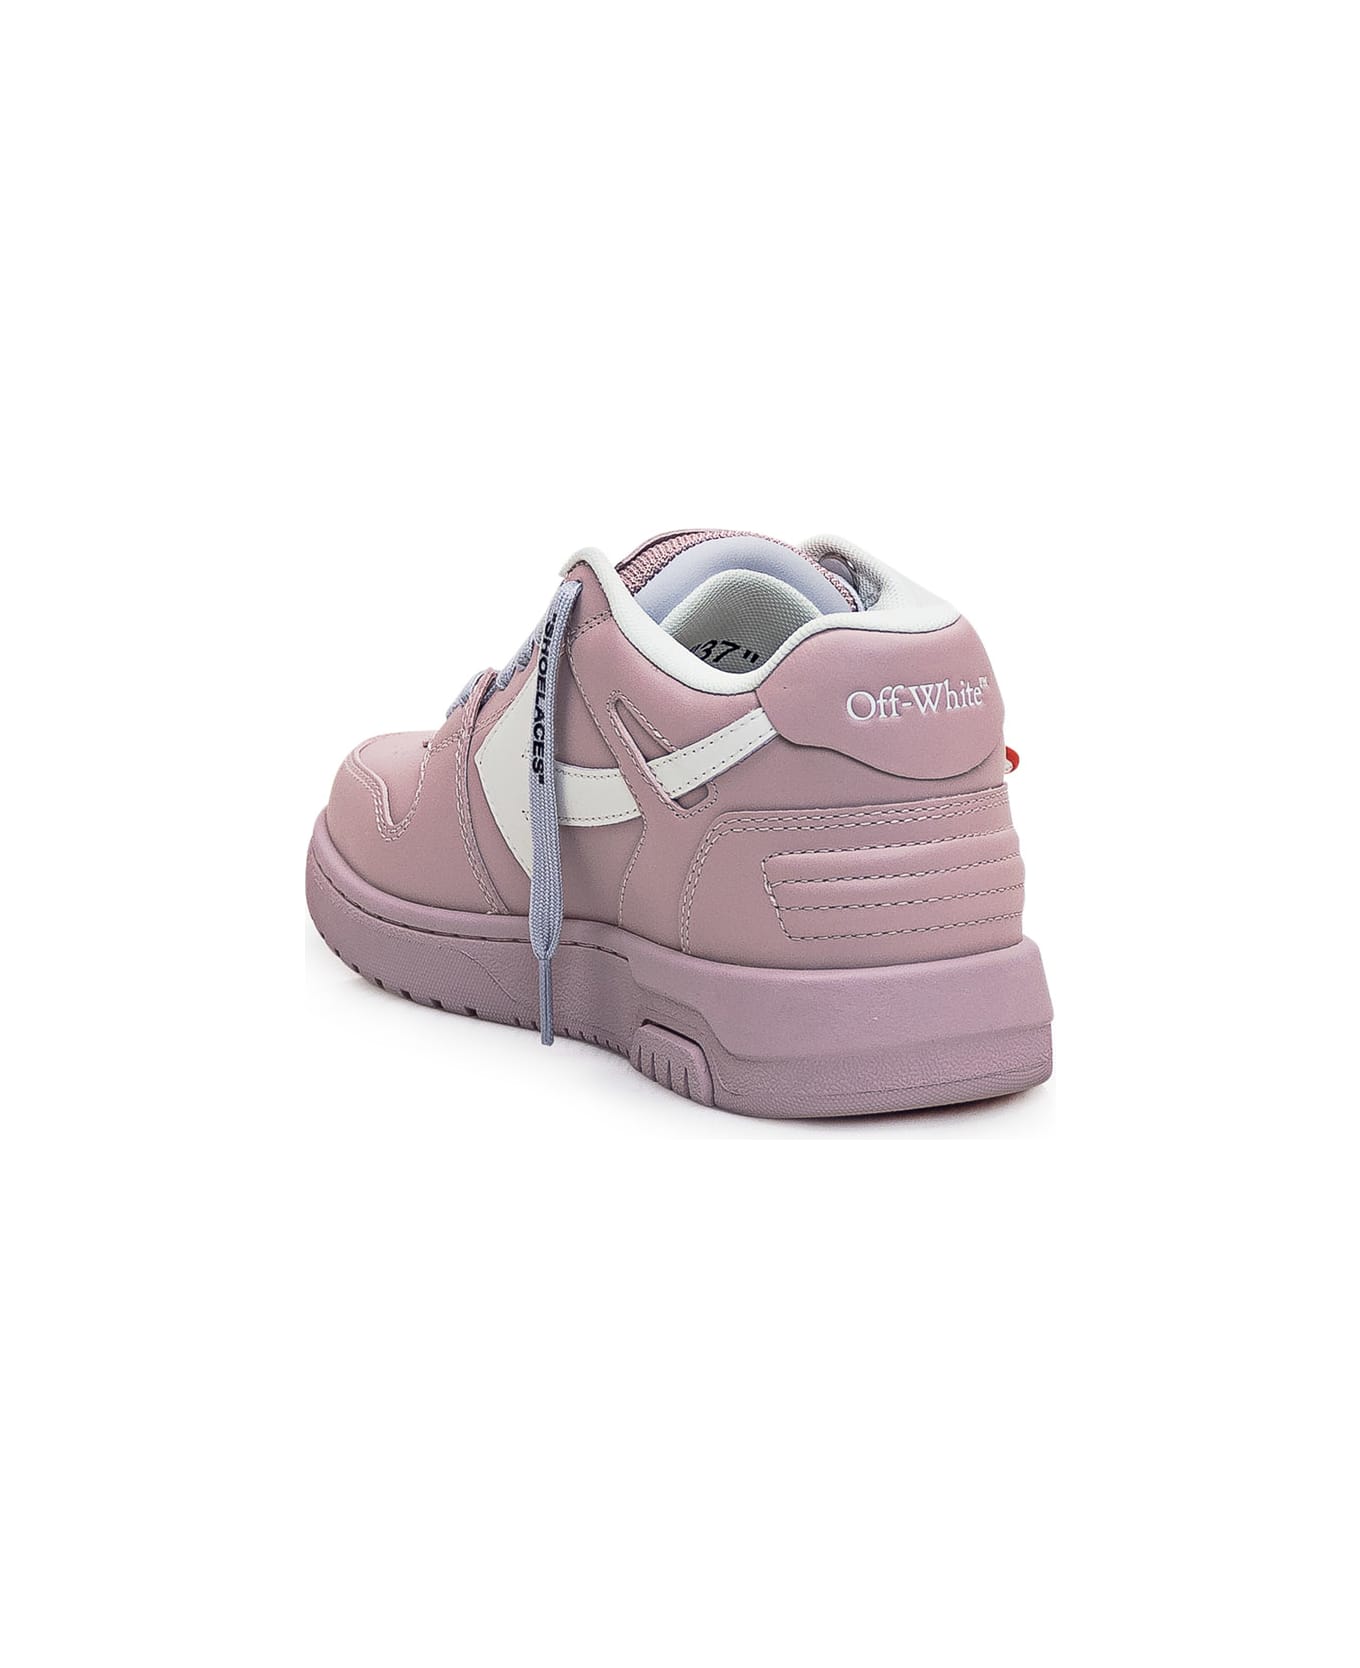 Off-White Out Of Office Sneaker - LILAC WHITE